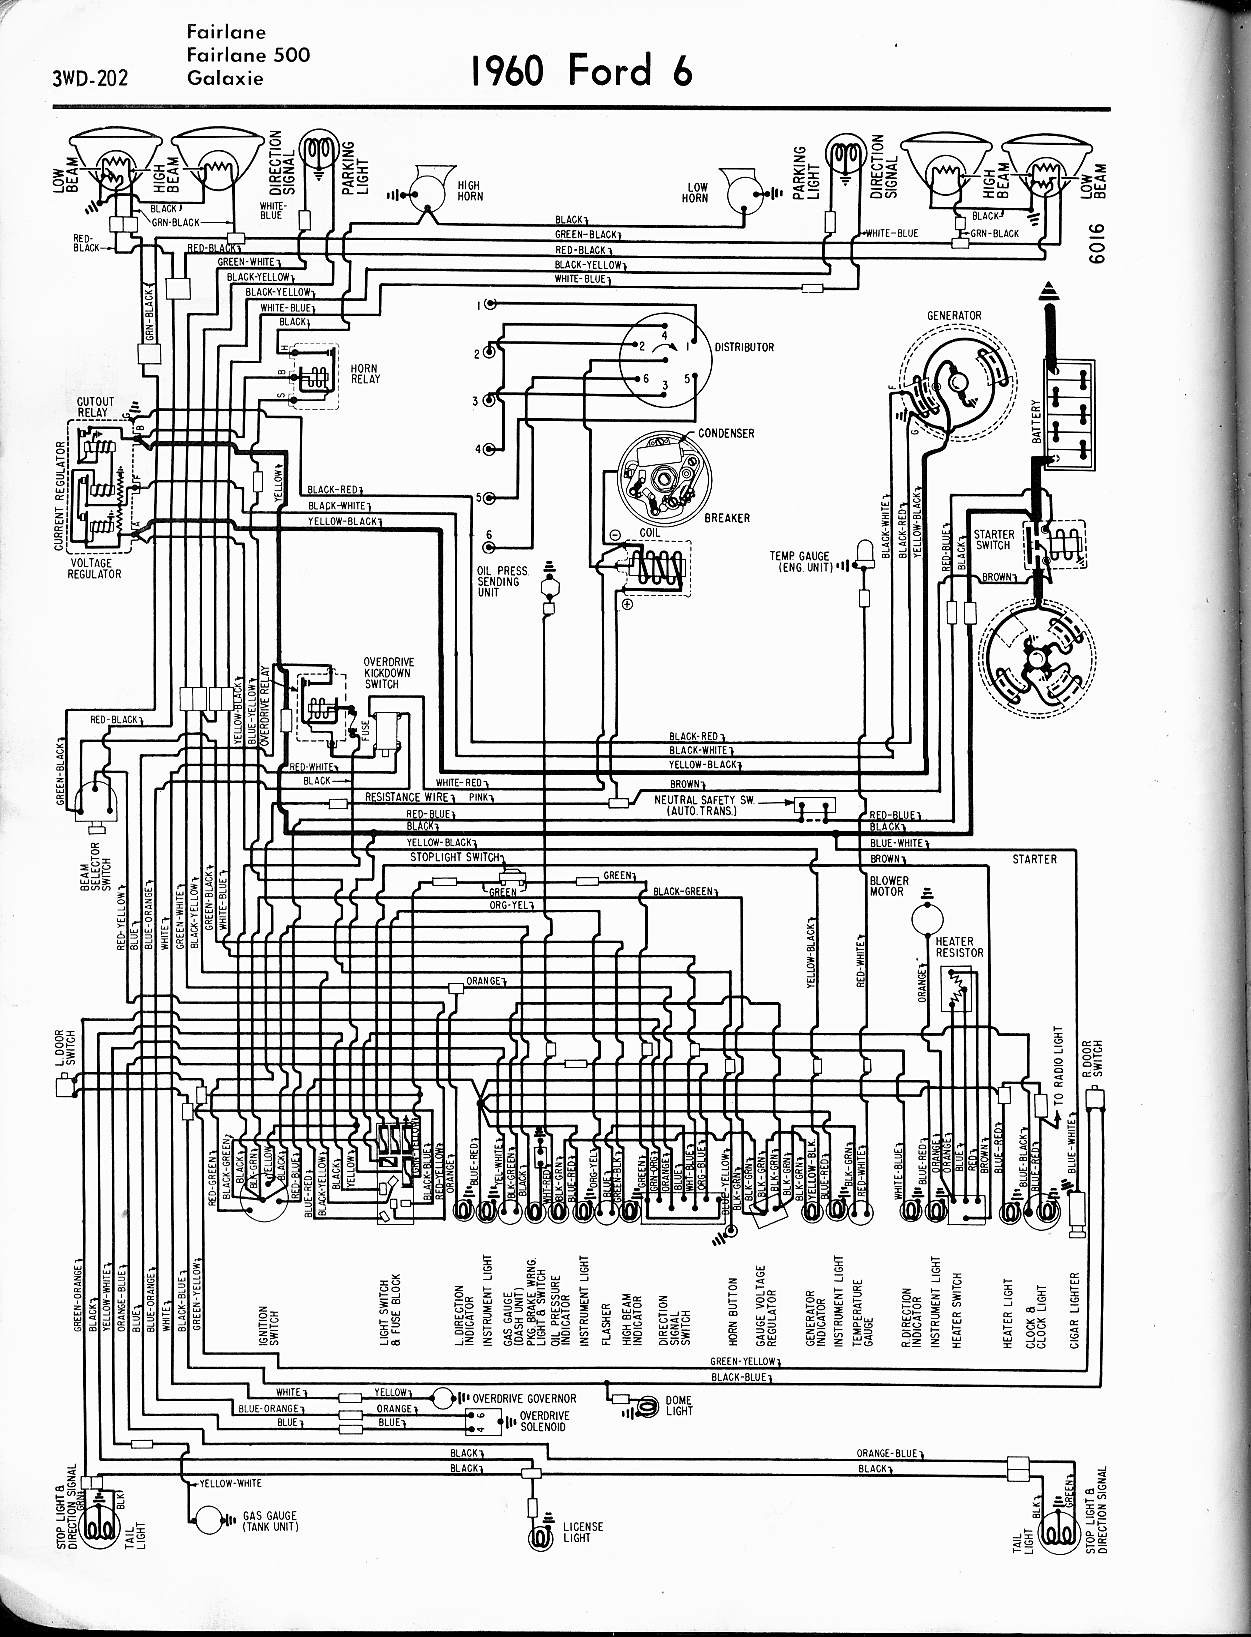 4 6 ford Engine Diagram 57 65 ford Wiring Diagrams Of 4 6 ford Engine Diagram